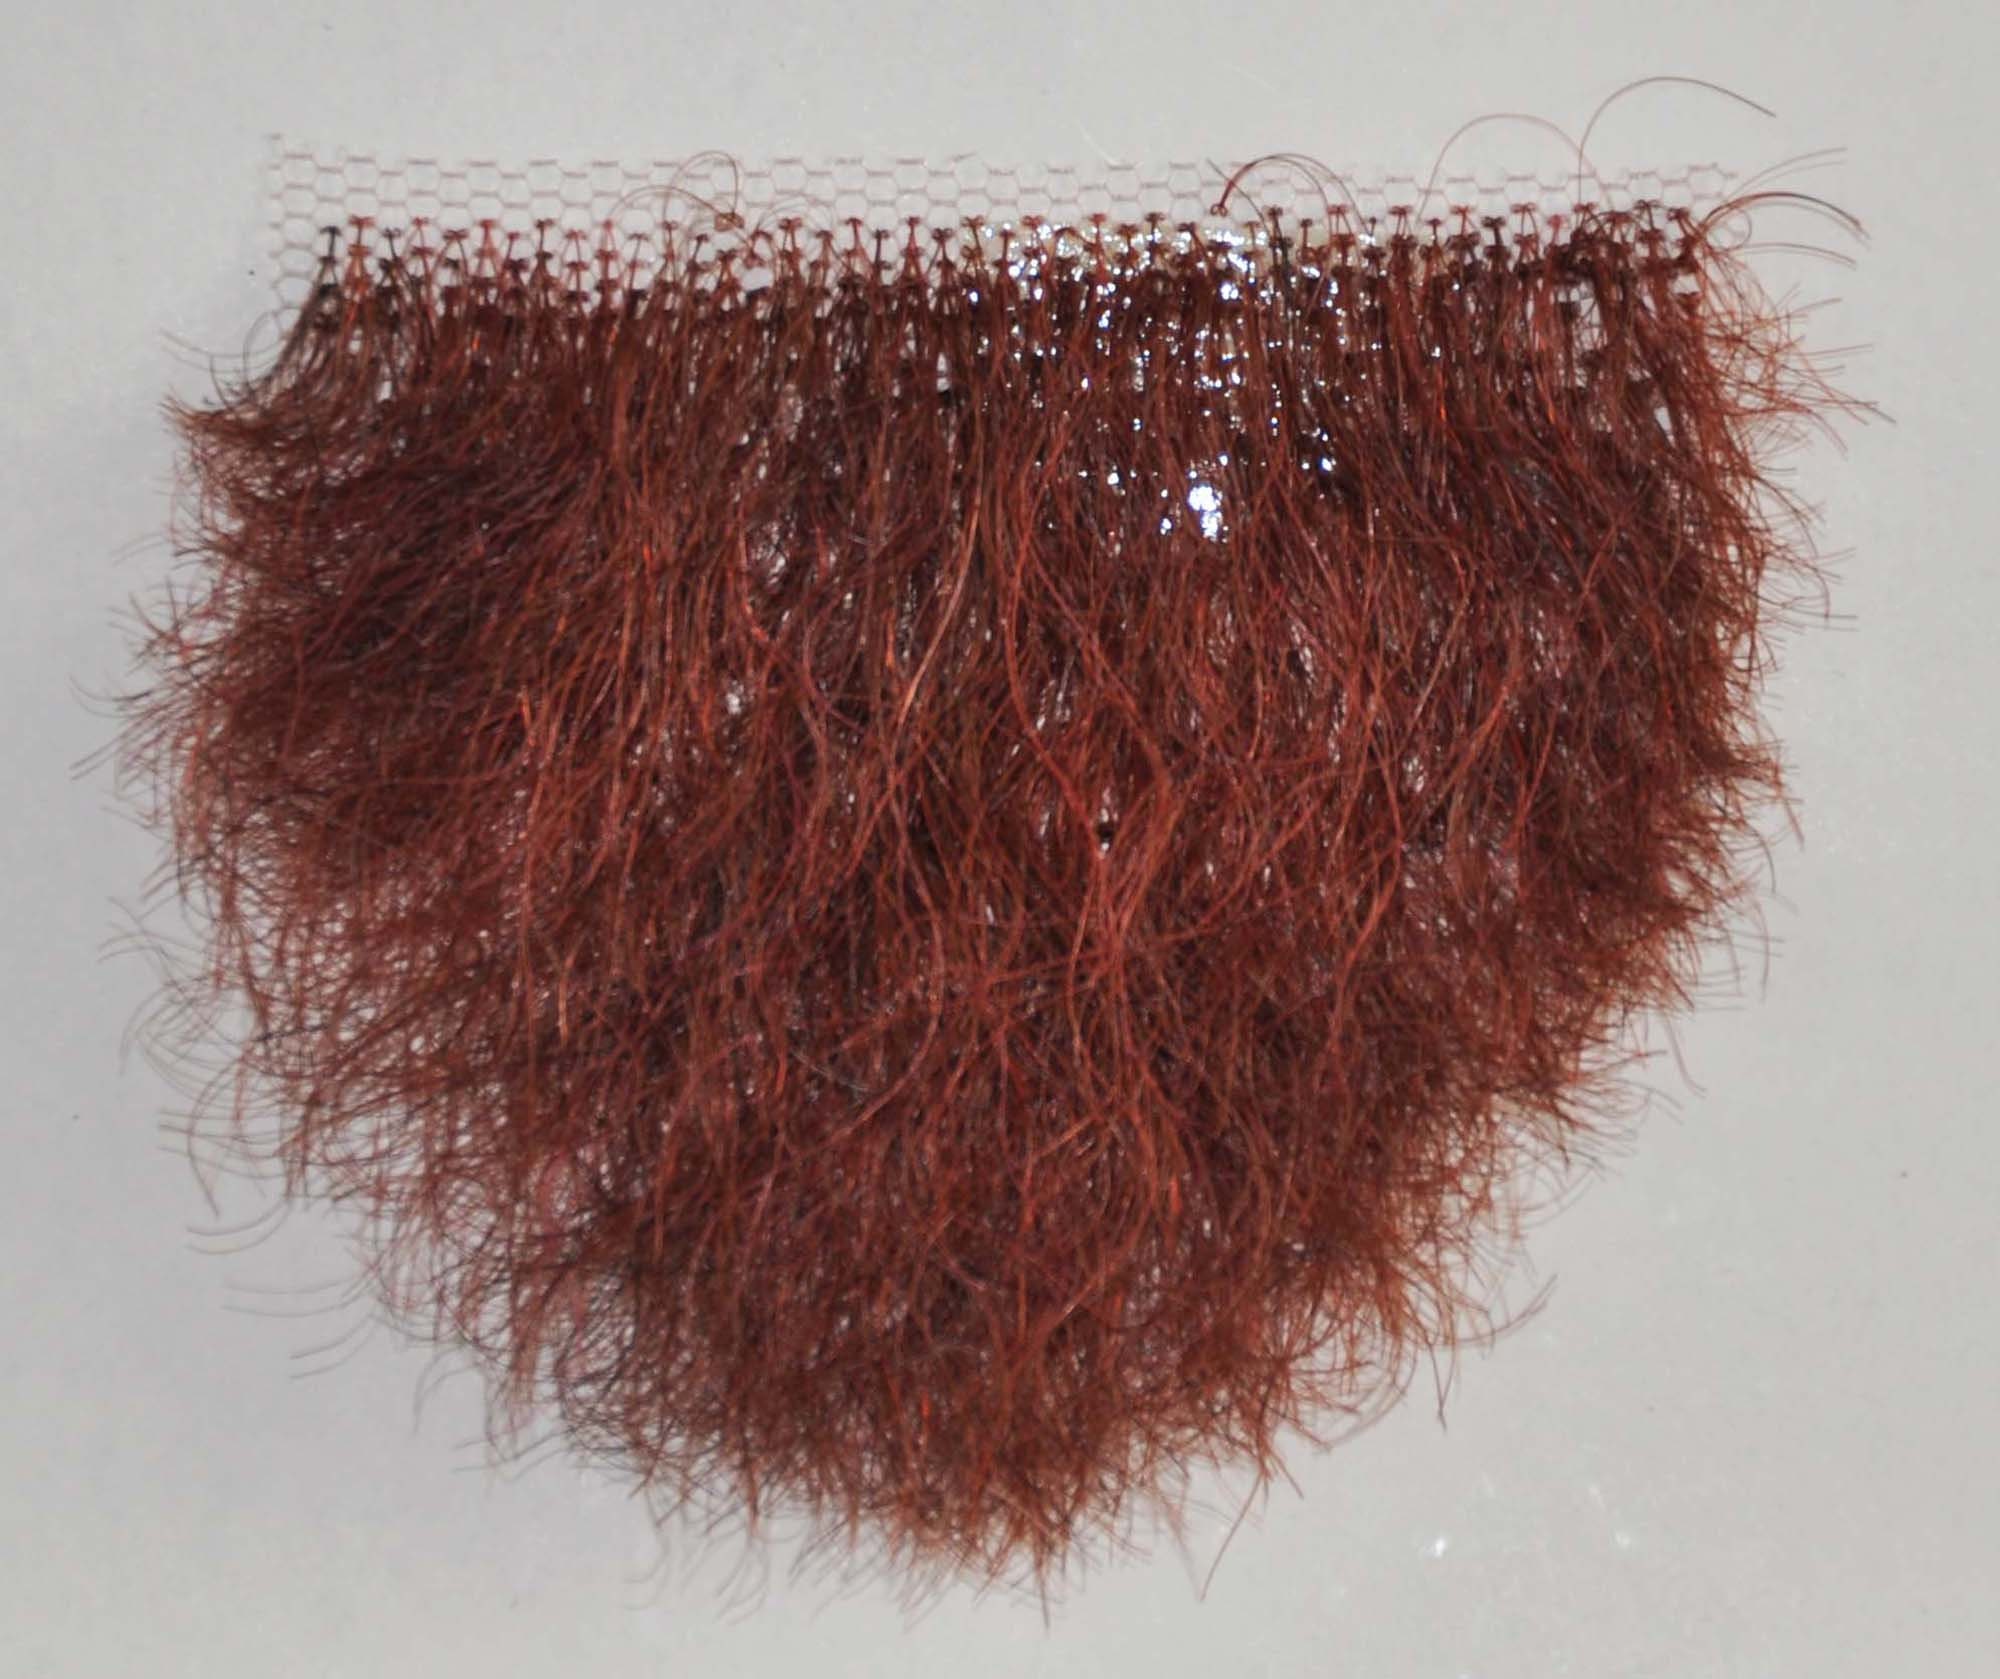 MakupArtist Pubic Toupee Merkin Human Hair Very Small Unisex in 4 Colors  High Density 1.08 grams Red